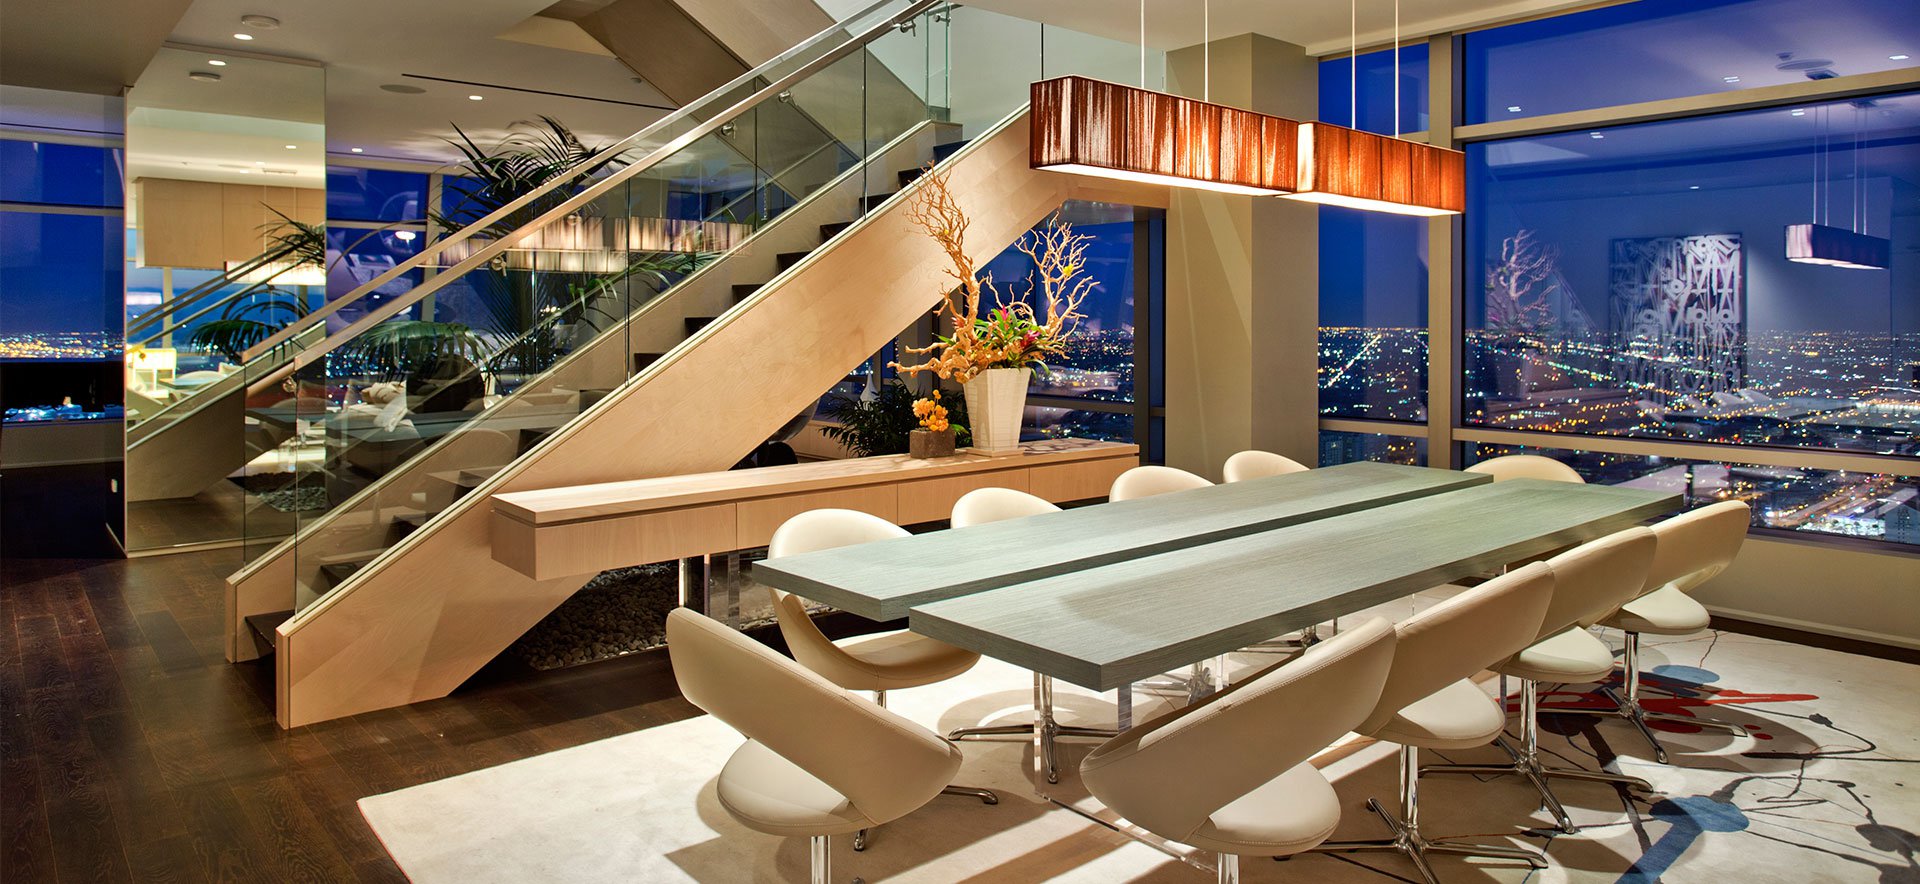 51A Duplex Penthouse of The Ritz-Carlton Residences in Los Angeles